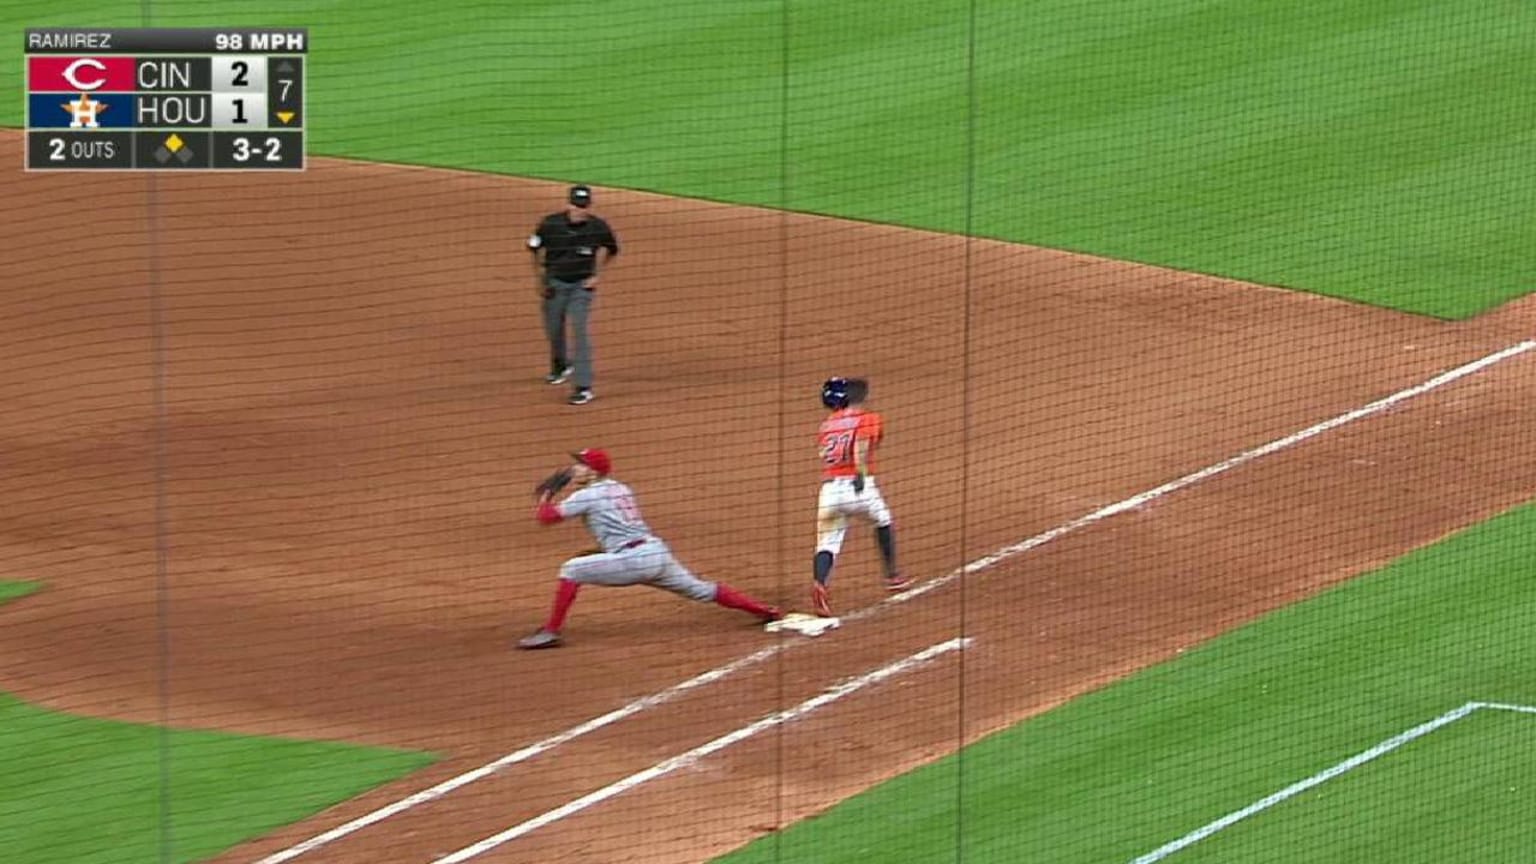 Marwin Gonzalez and Jose Altuve teamed up to give this young